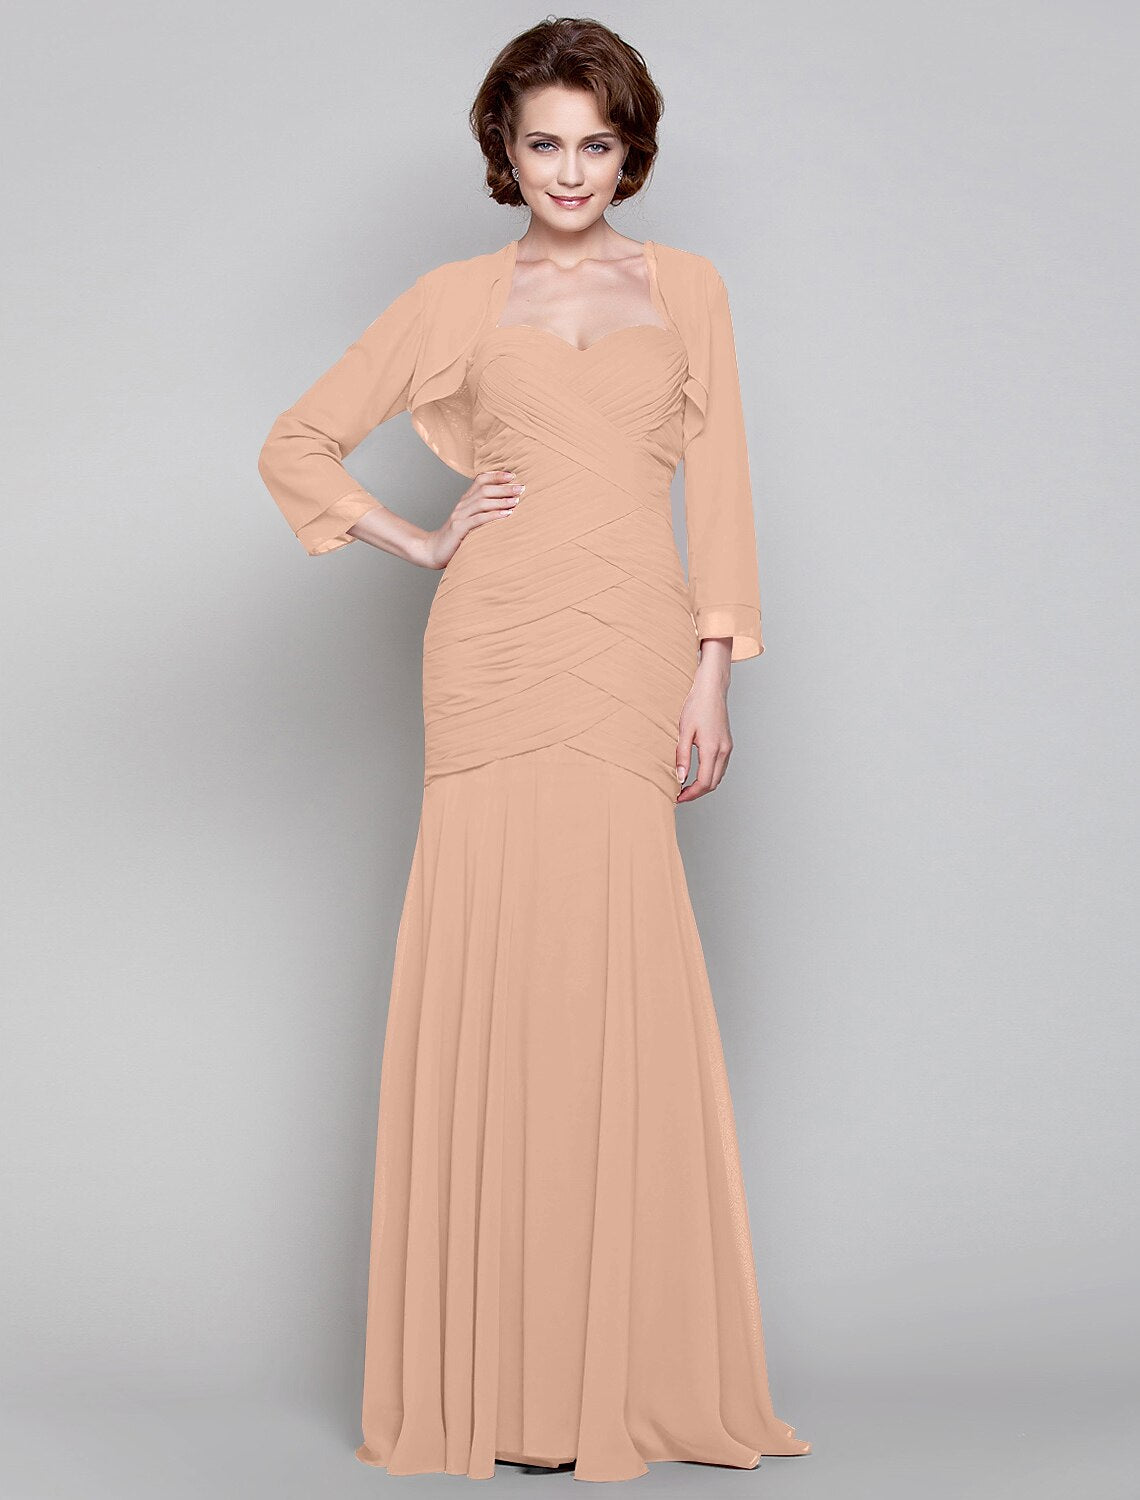 Mermaid / Trumpet Mother of the Bride Dress Two Piece Sweetheart Floor Length Chiffon Long Sleeve with Criss Cross